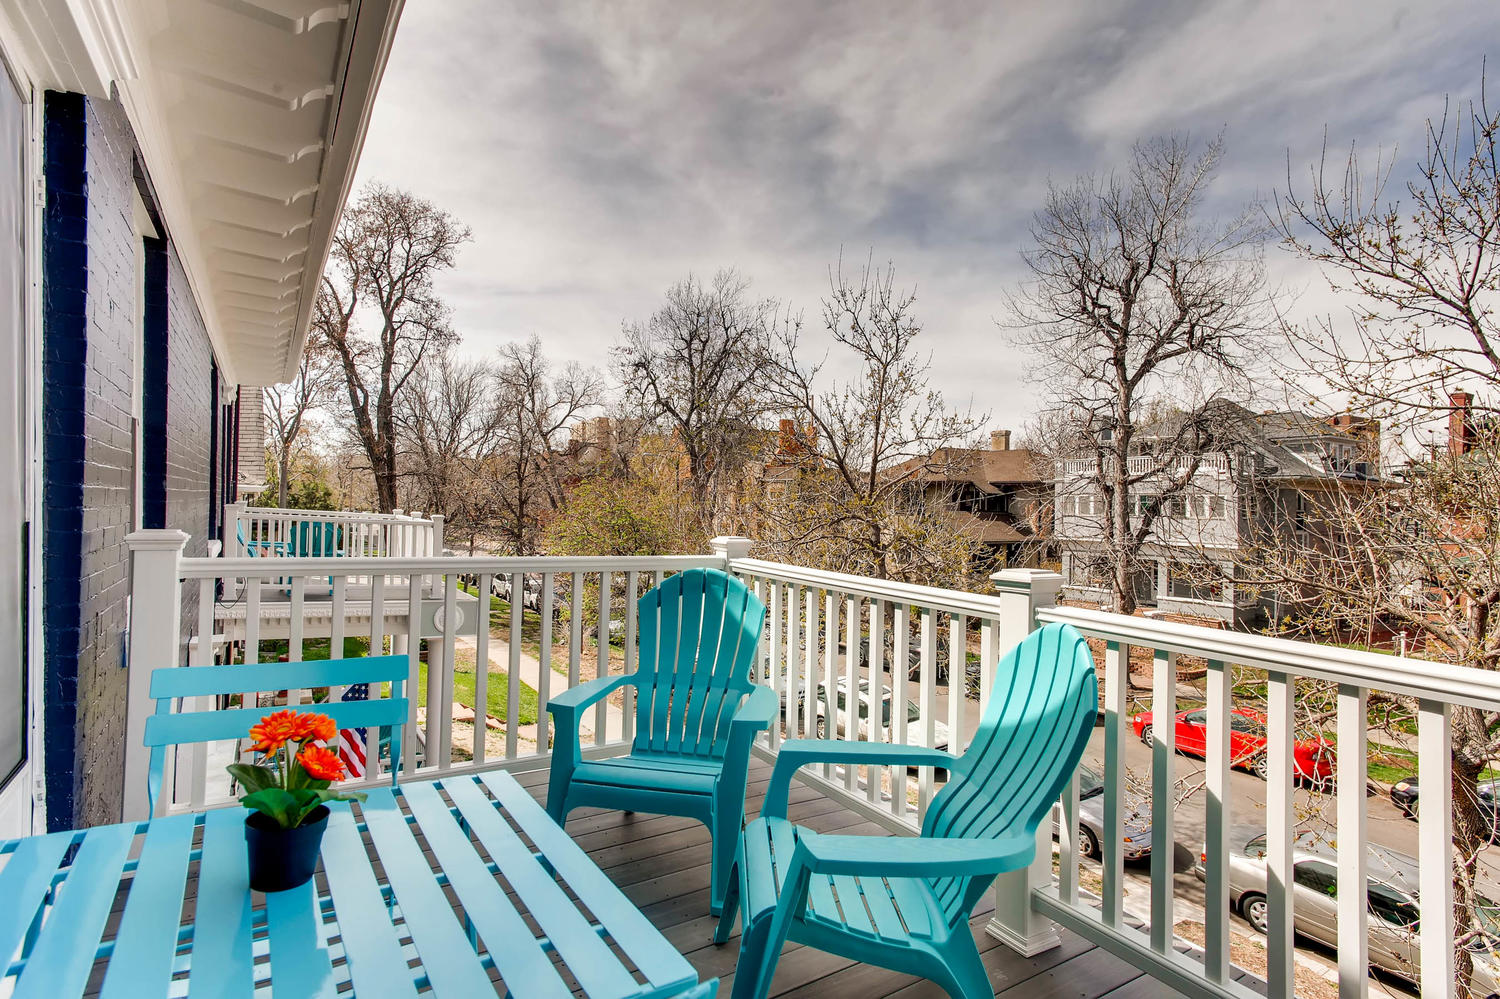 Balcony featuring teal blue outdoor furniture include two chaise lounge chairs with a neighborhood scene in the back.